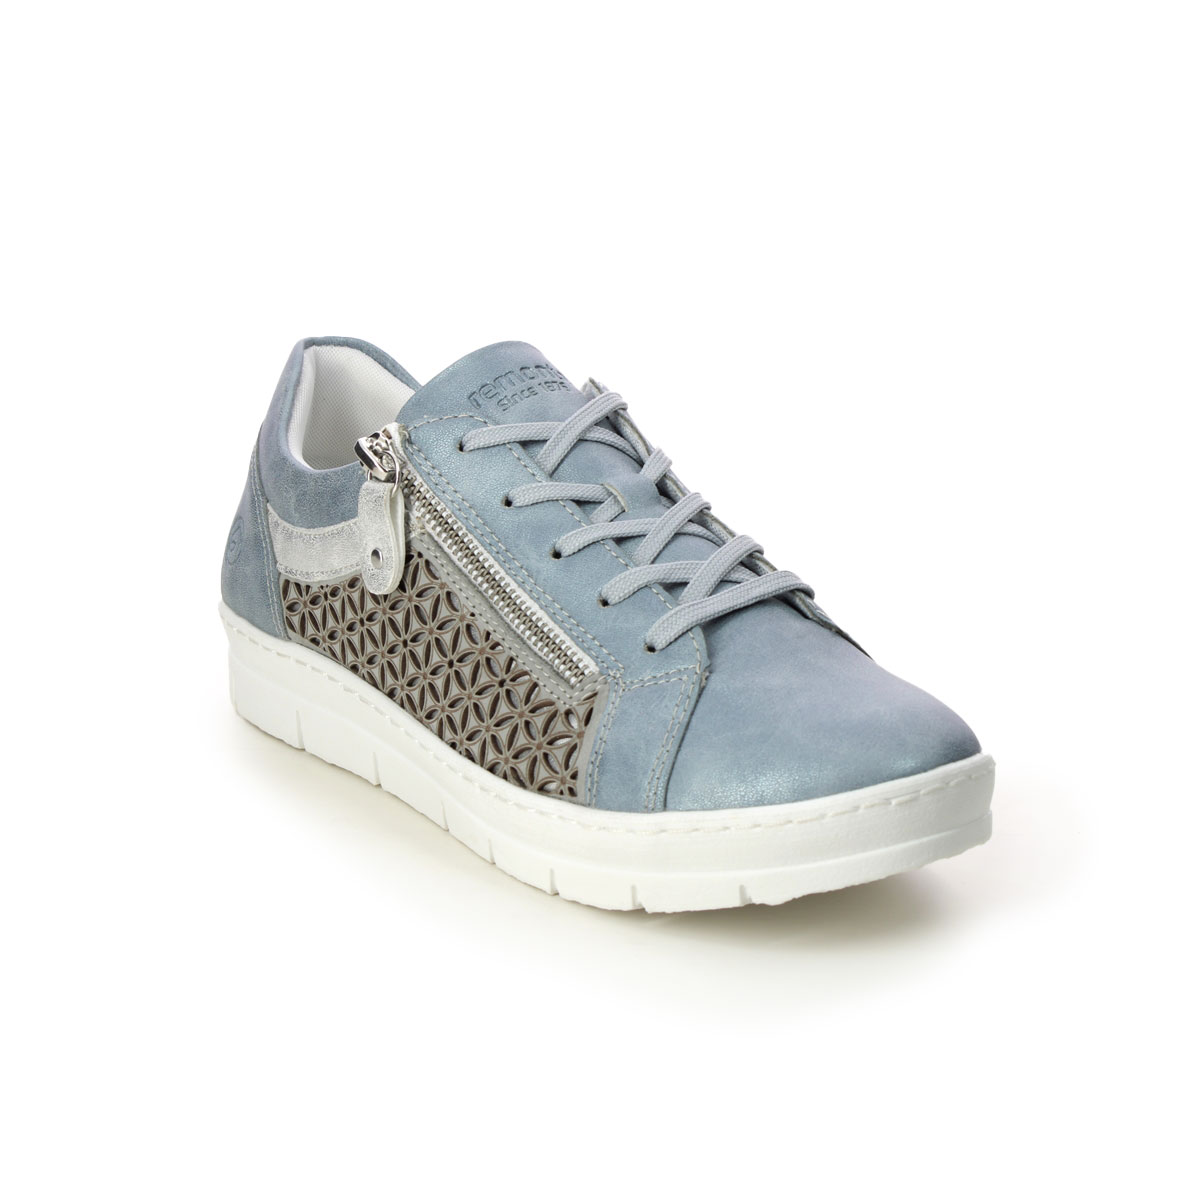 Remonte D5830-12 Ravenna 11 Denim leather Womens trainers in a Plain Leather and Man-made in Size 40